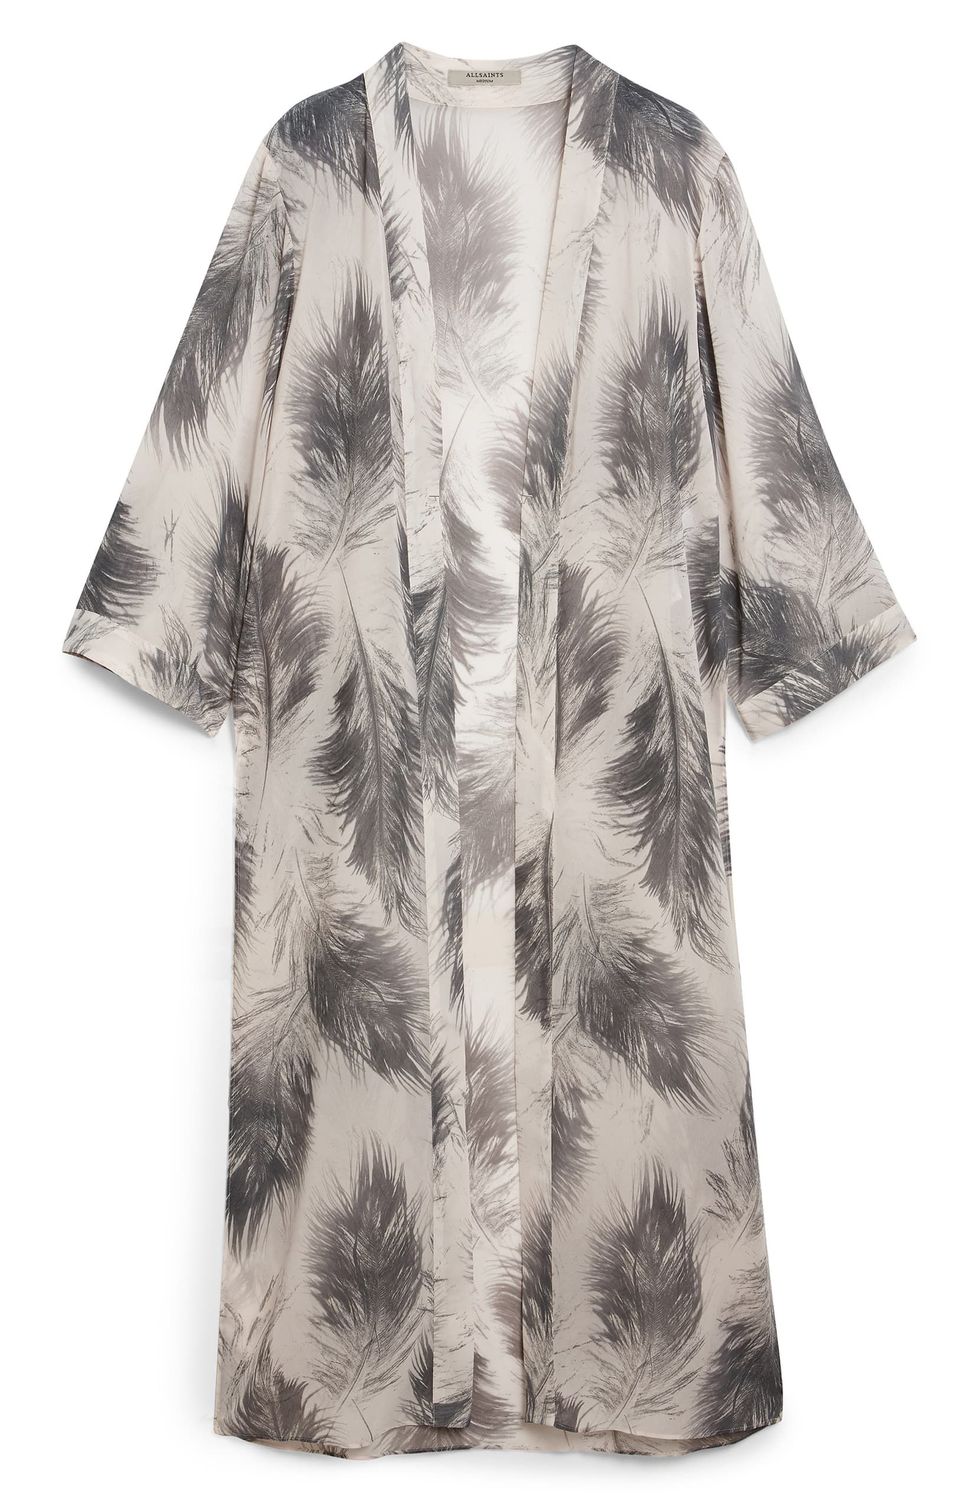 Shop the Look: Feather-Print Duster